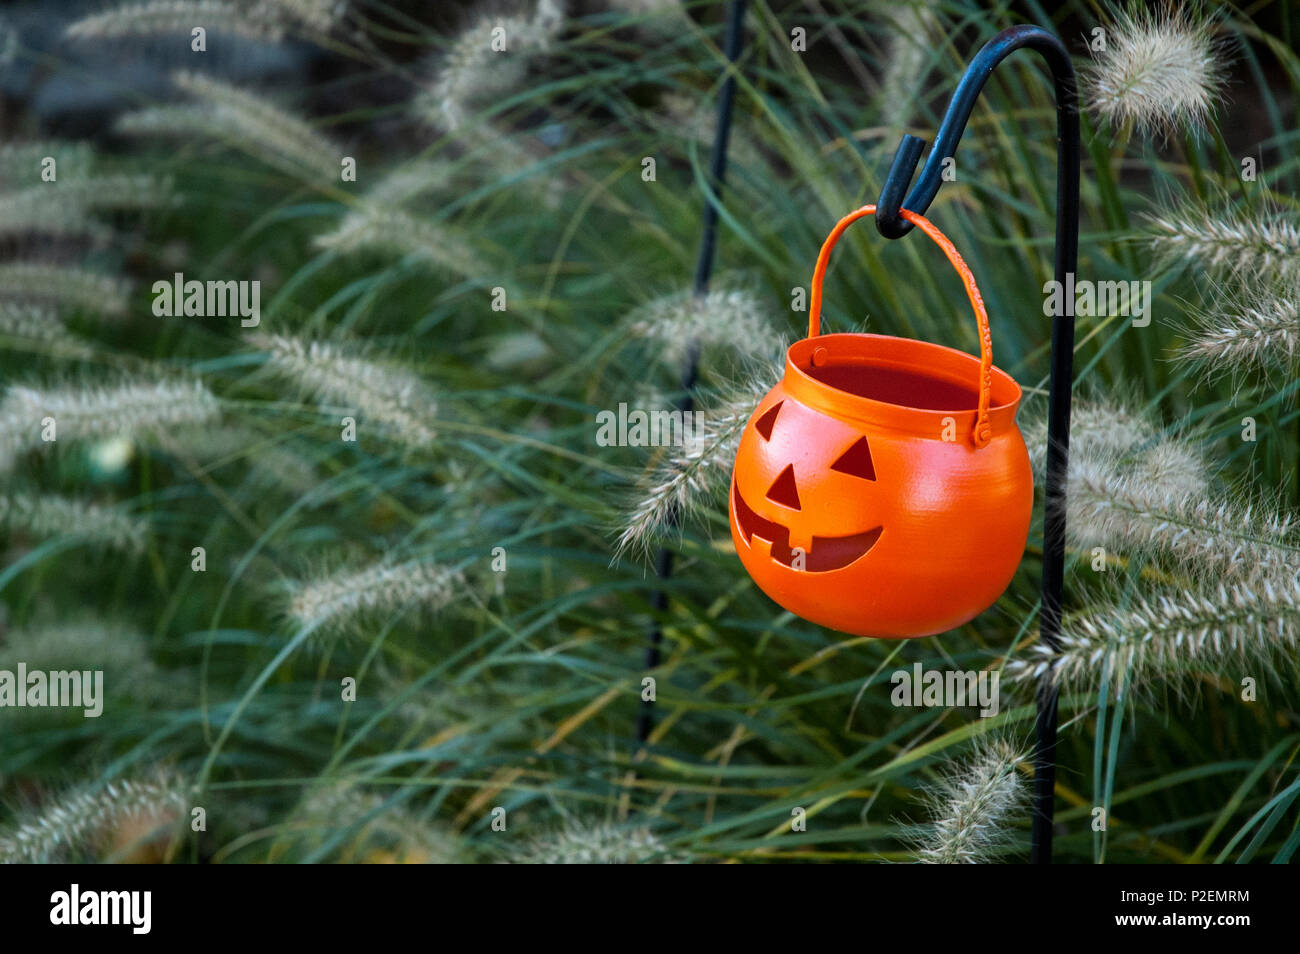 Jack-o'-lantern trick-or-treat container at Halloween Stock Photo